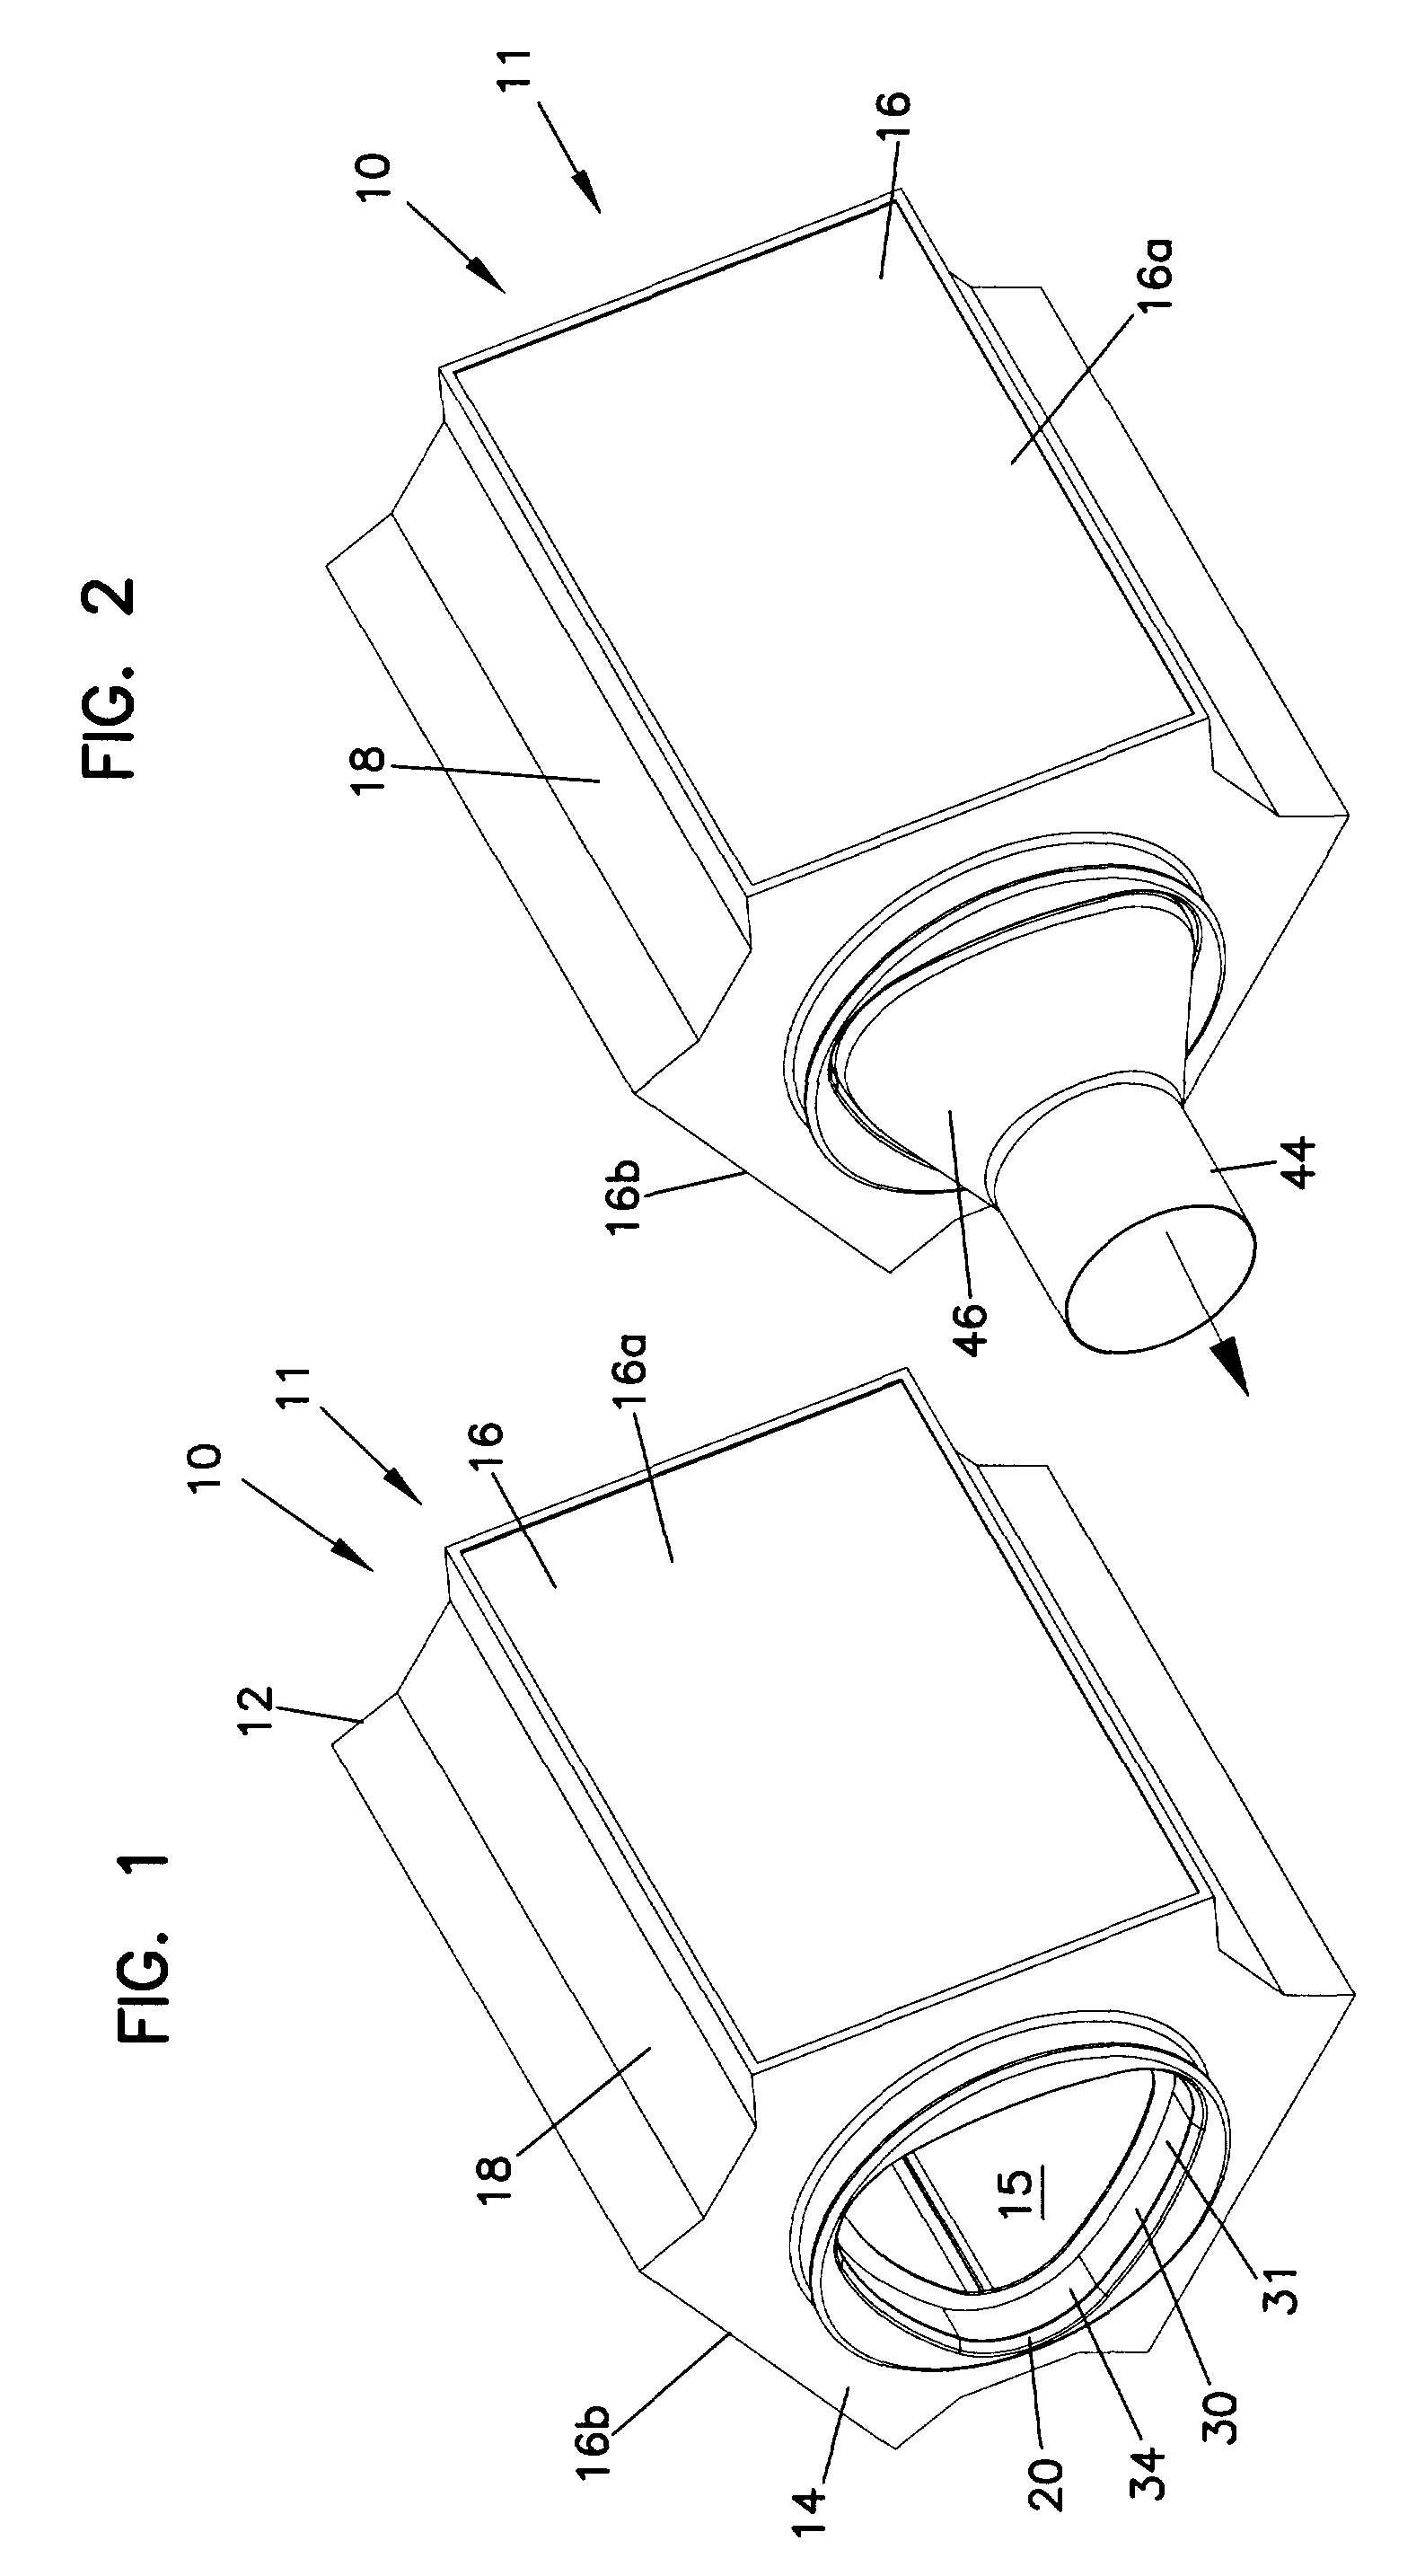 Non-cylindrical filter elements, and methods